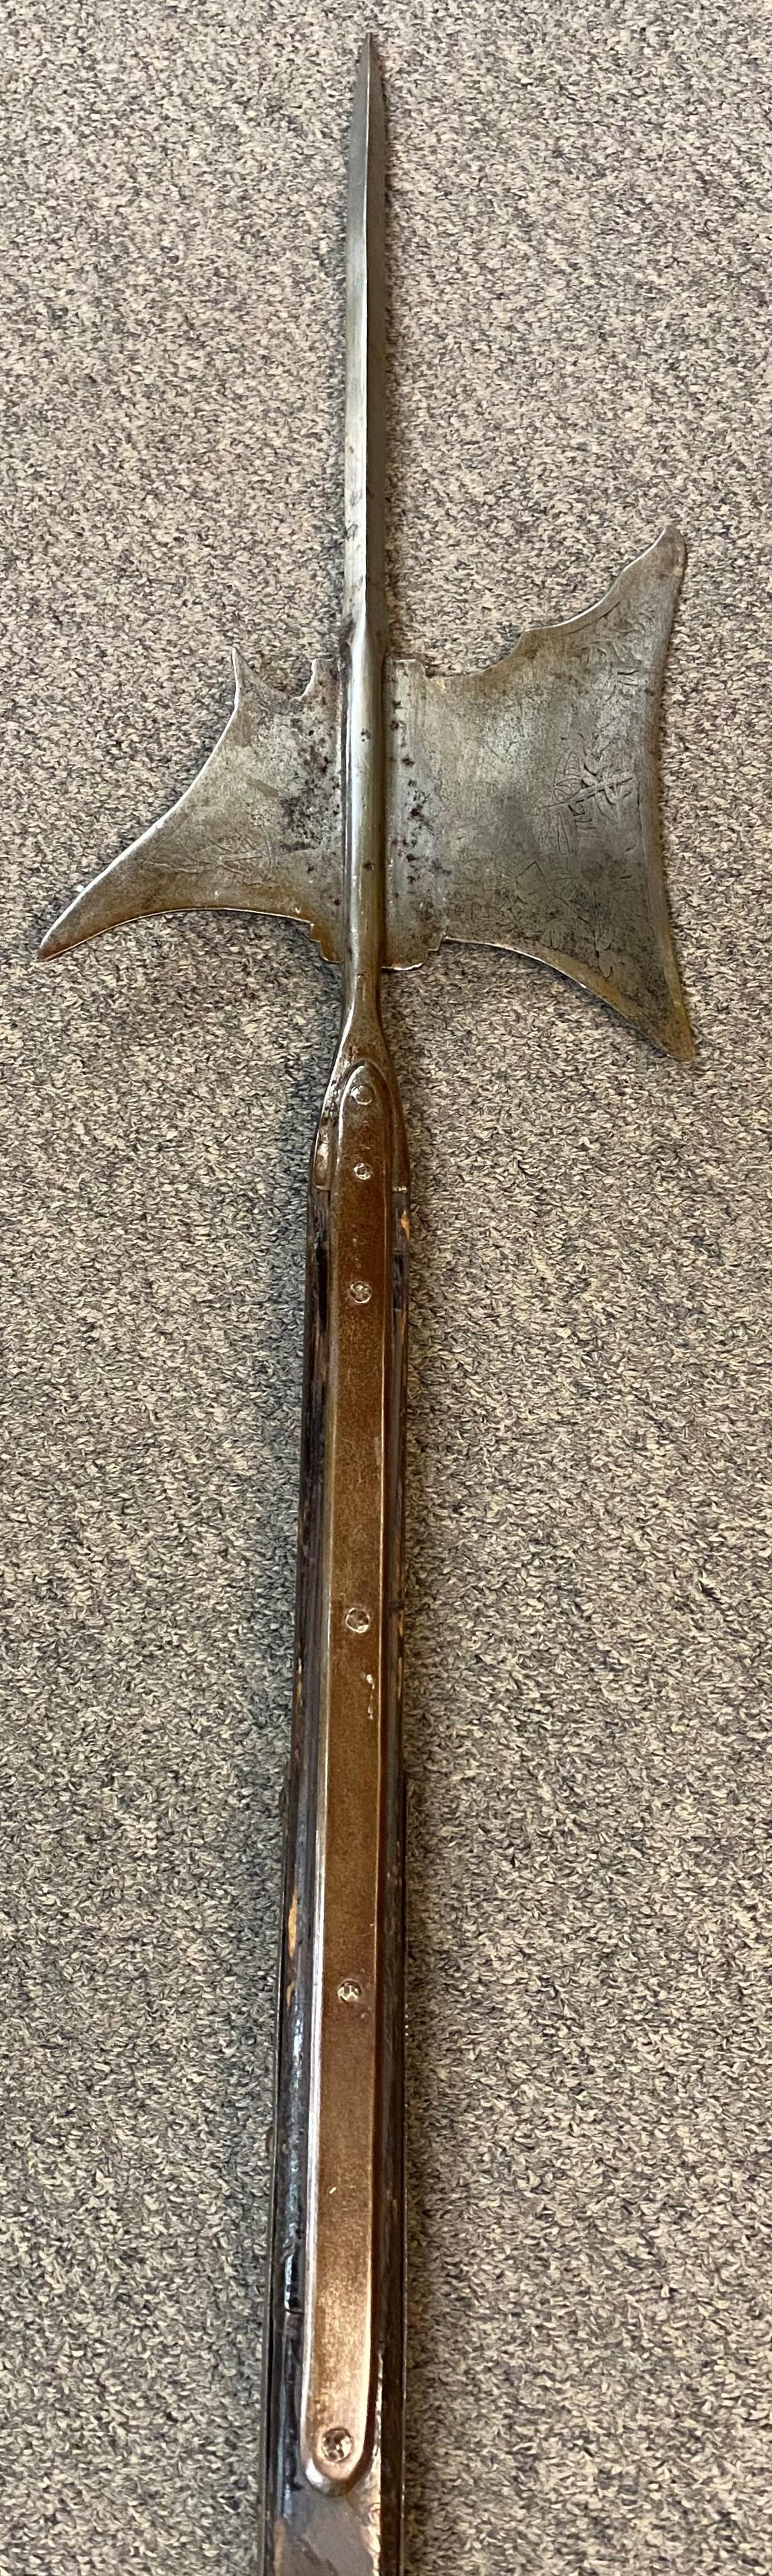 A fine example of a mid-17th century steel halberd with pole arm, with a diamond shape thrusting point, axe blade with shallow concave cutting edge featuring overall etched decoration, slightly curved rear fluke with downward-pointing beak that is